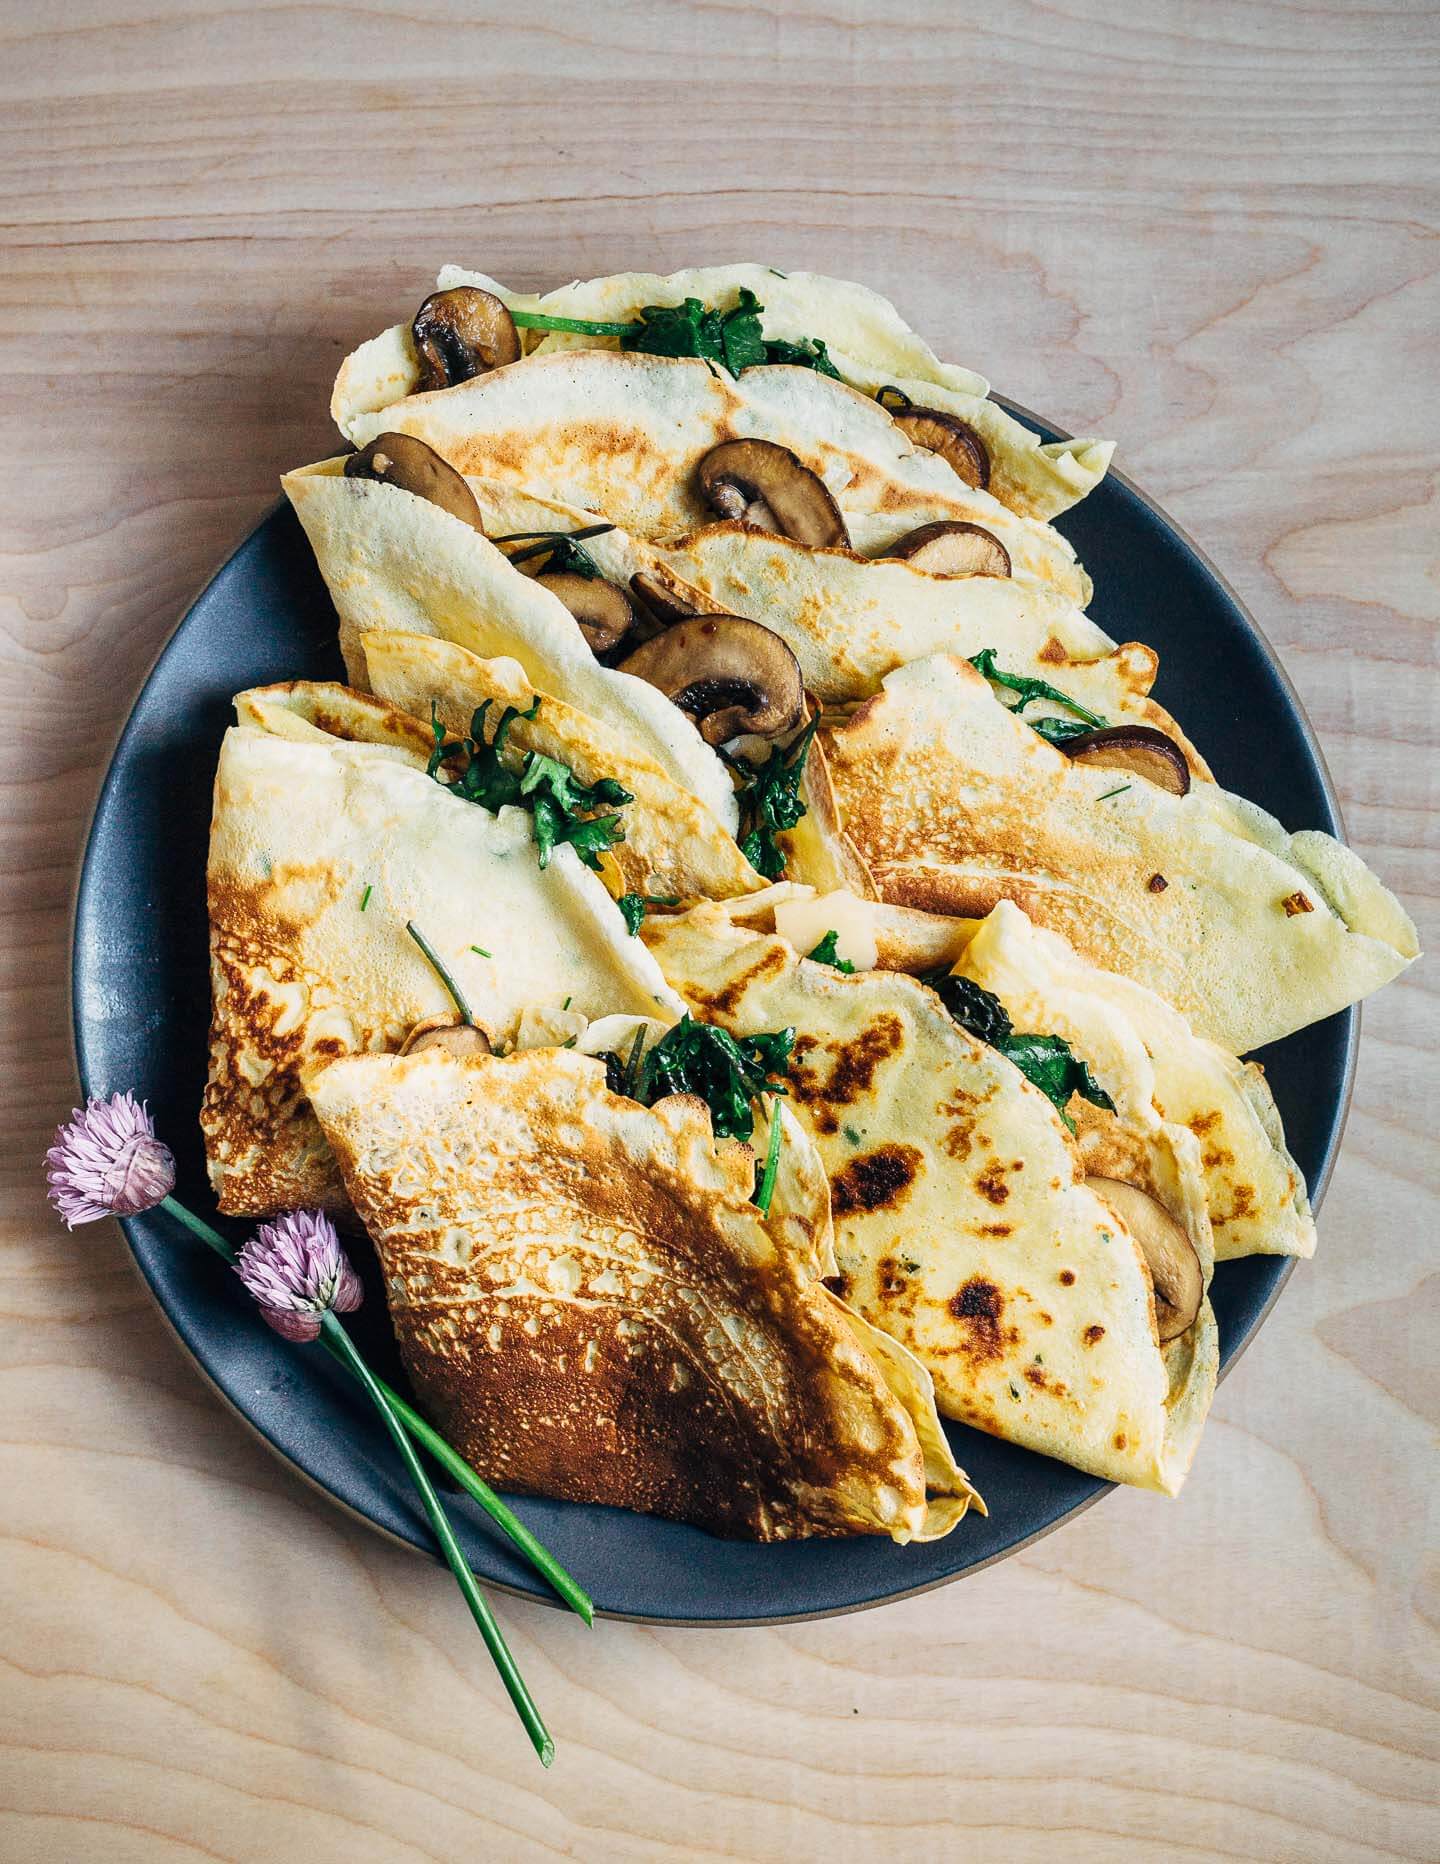 Savory crepes with mushrooms, leafy greens, and garlic make for a lovely spring-inspired vegetarian meal. Made with all-purpose flour, these savory crepes are surprisingly easy to make and cook up quickly. The options for filling your savory crepes are nearly endless.